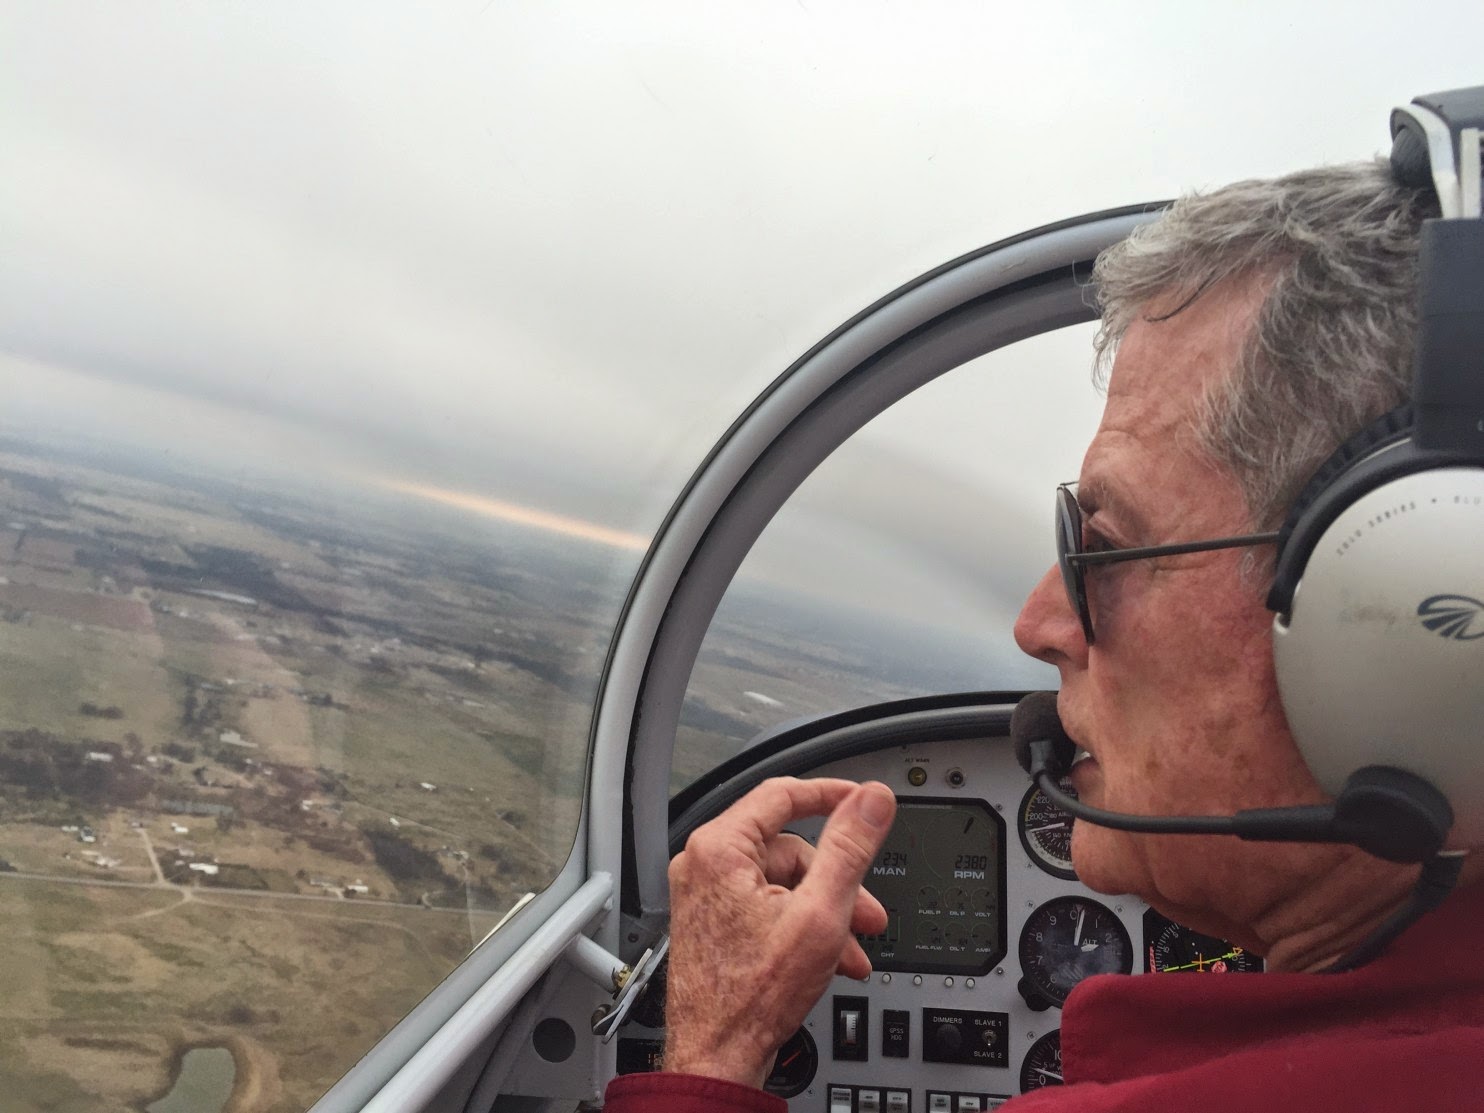 Kathryn's Report: Senator Inhofe works to loosen medical exam requirements  for private pilots